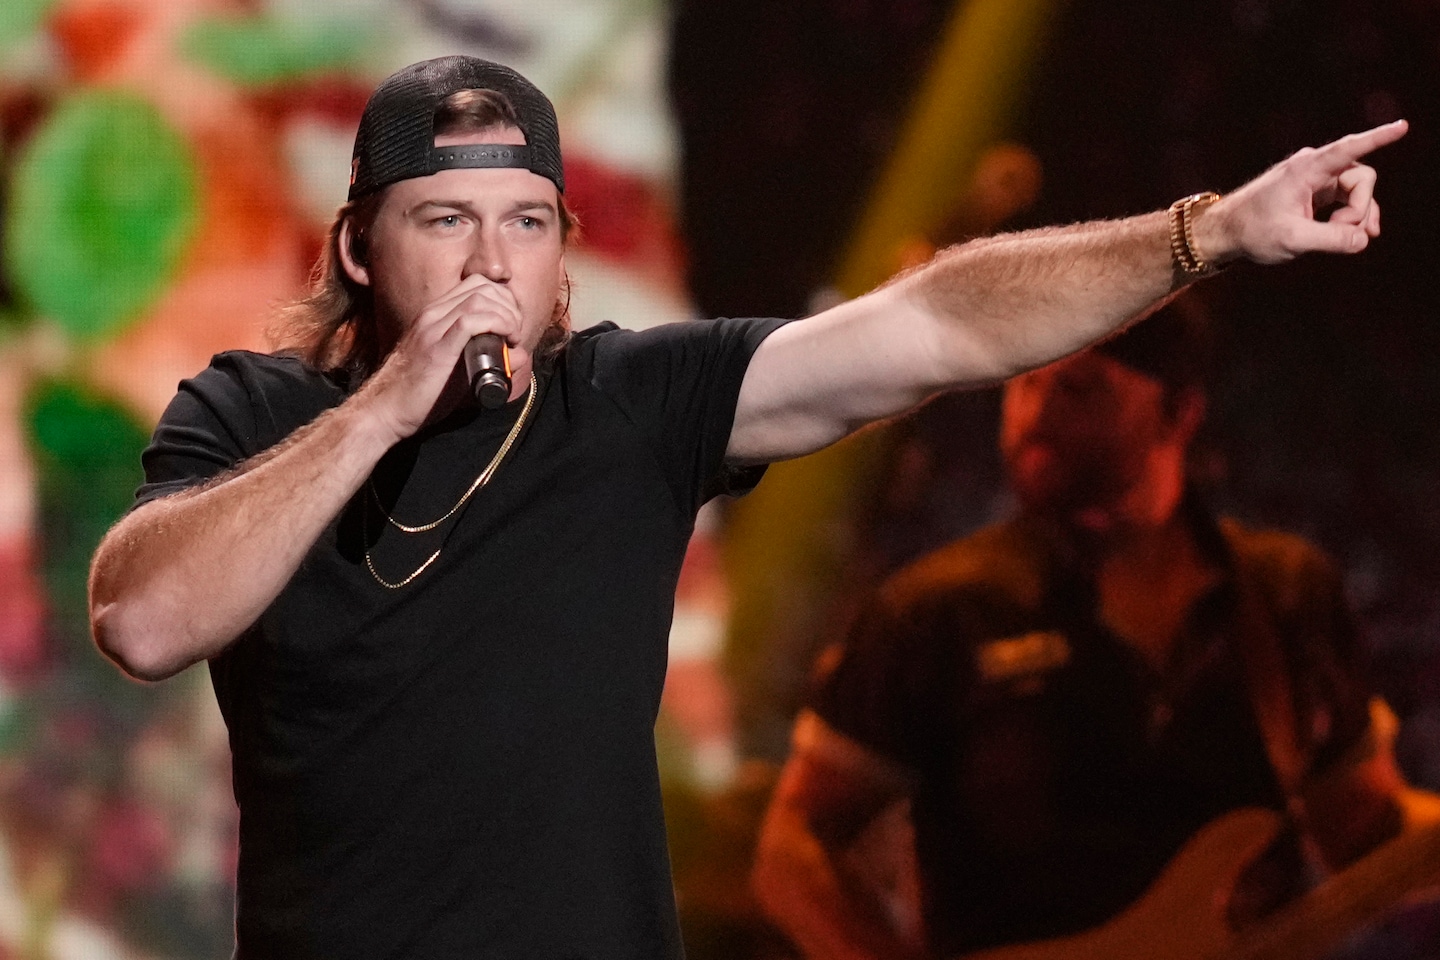 Country star Morgan Wallen arrested, accused of throwing chair from bar roof